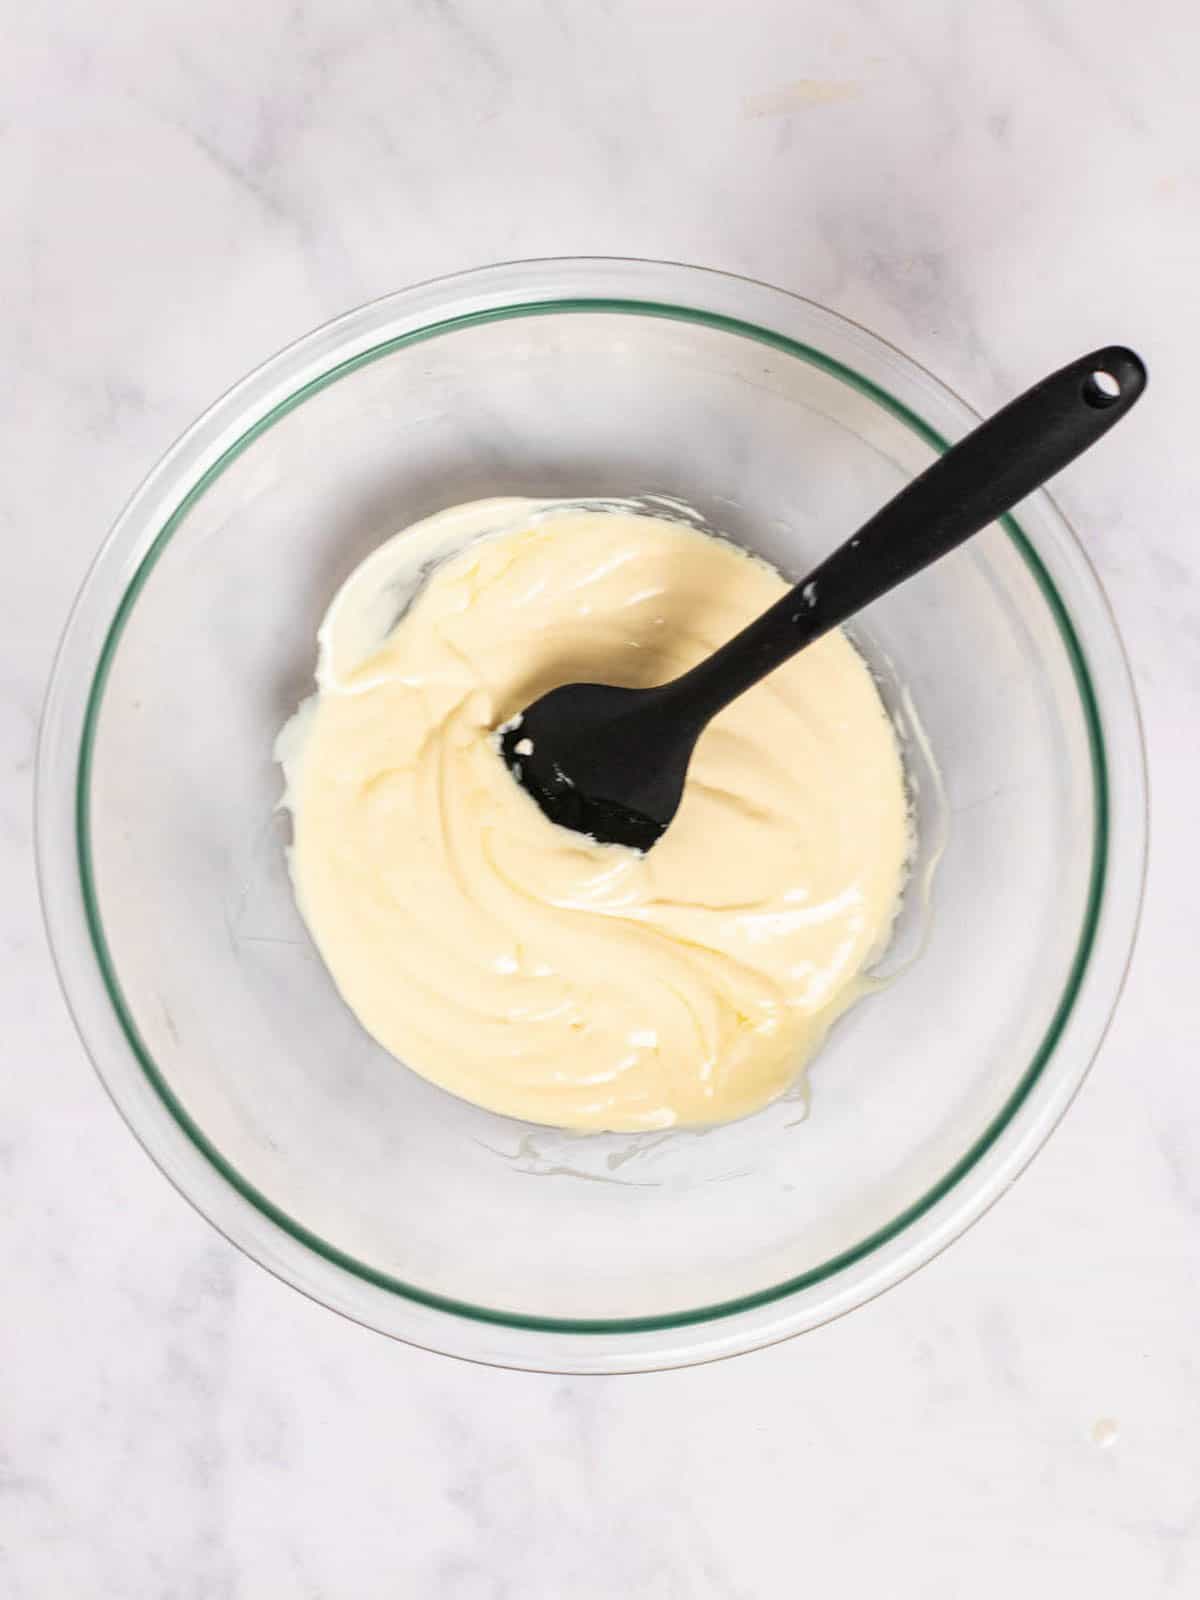 Soften cream cheese and cooled melted margarine combined in a glass bowl.